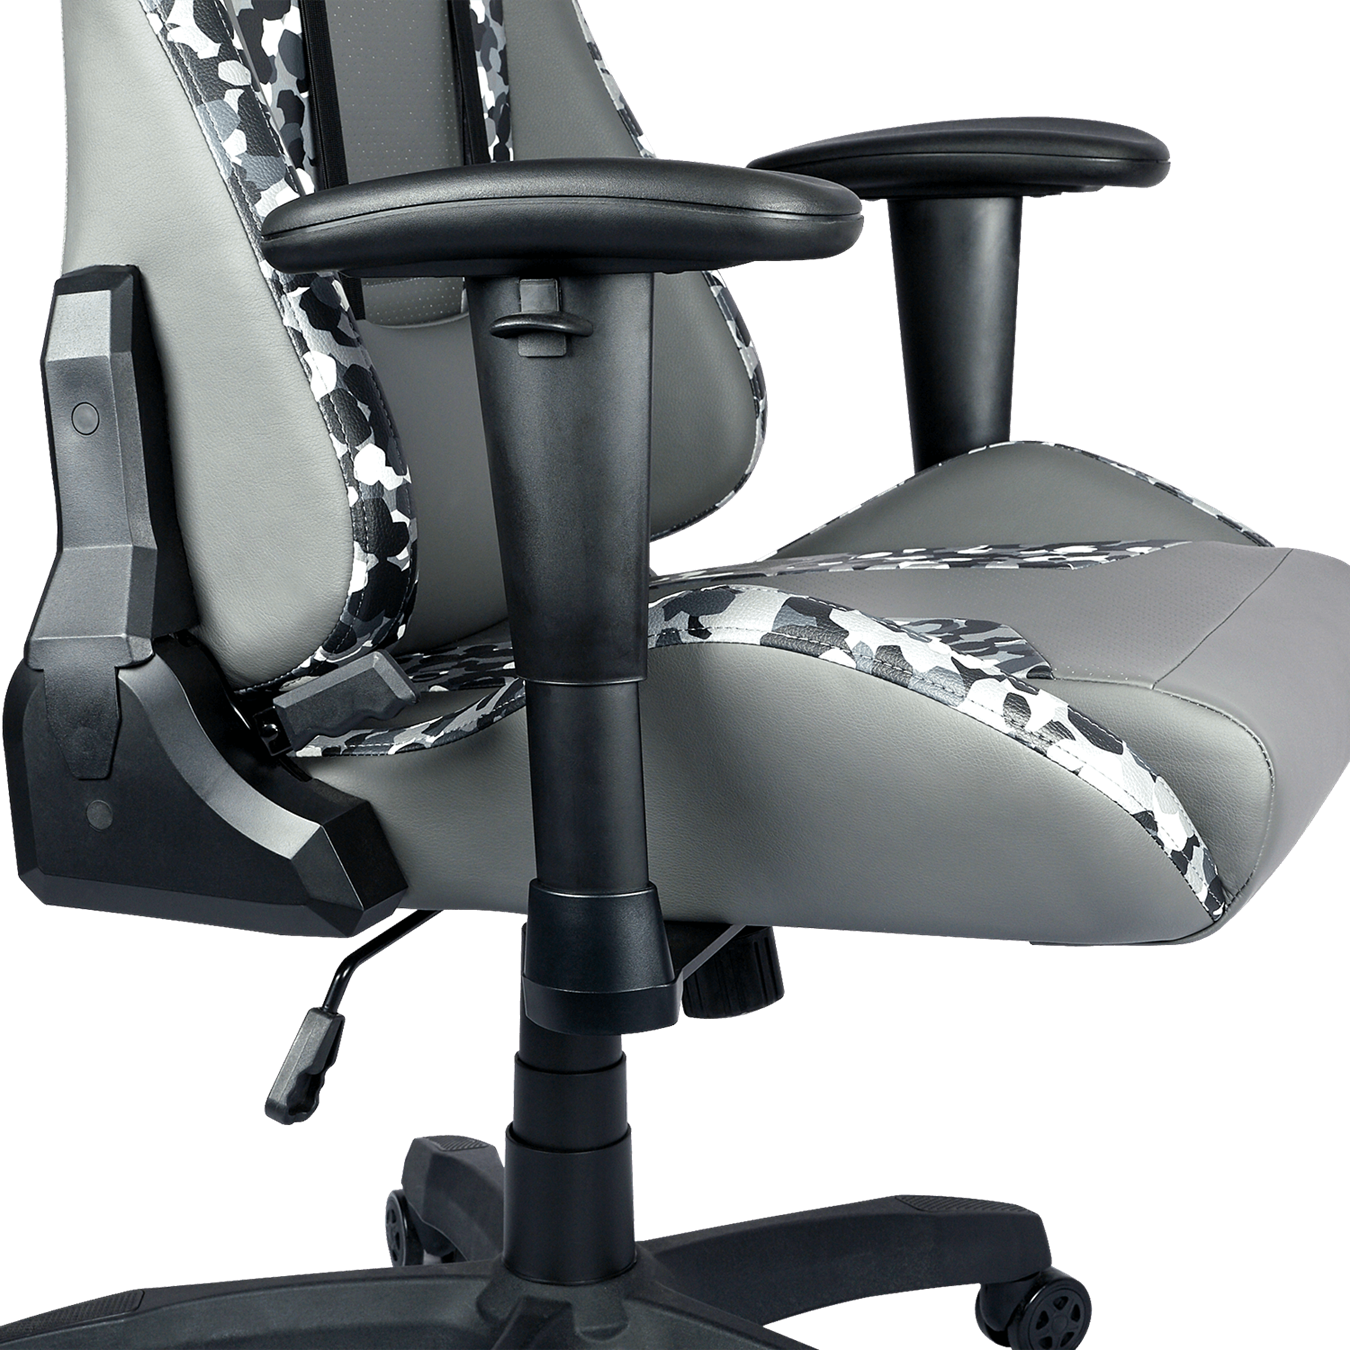 Caliber R1S Dark Knight CAMO Gaming Chair - Premium quality and design sets you apart from the competition. The breathable PU provides maximum comfort for all body types and keeps you feeling cool and energized at all times.